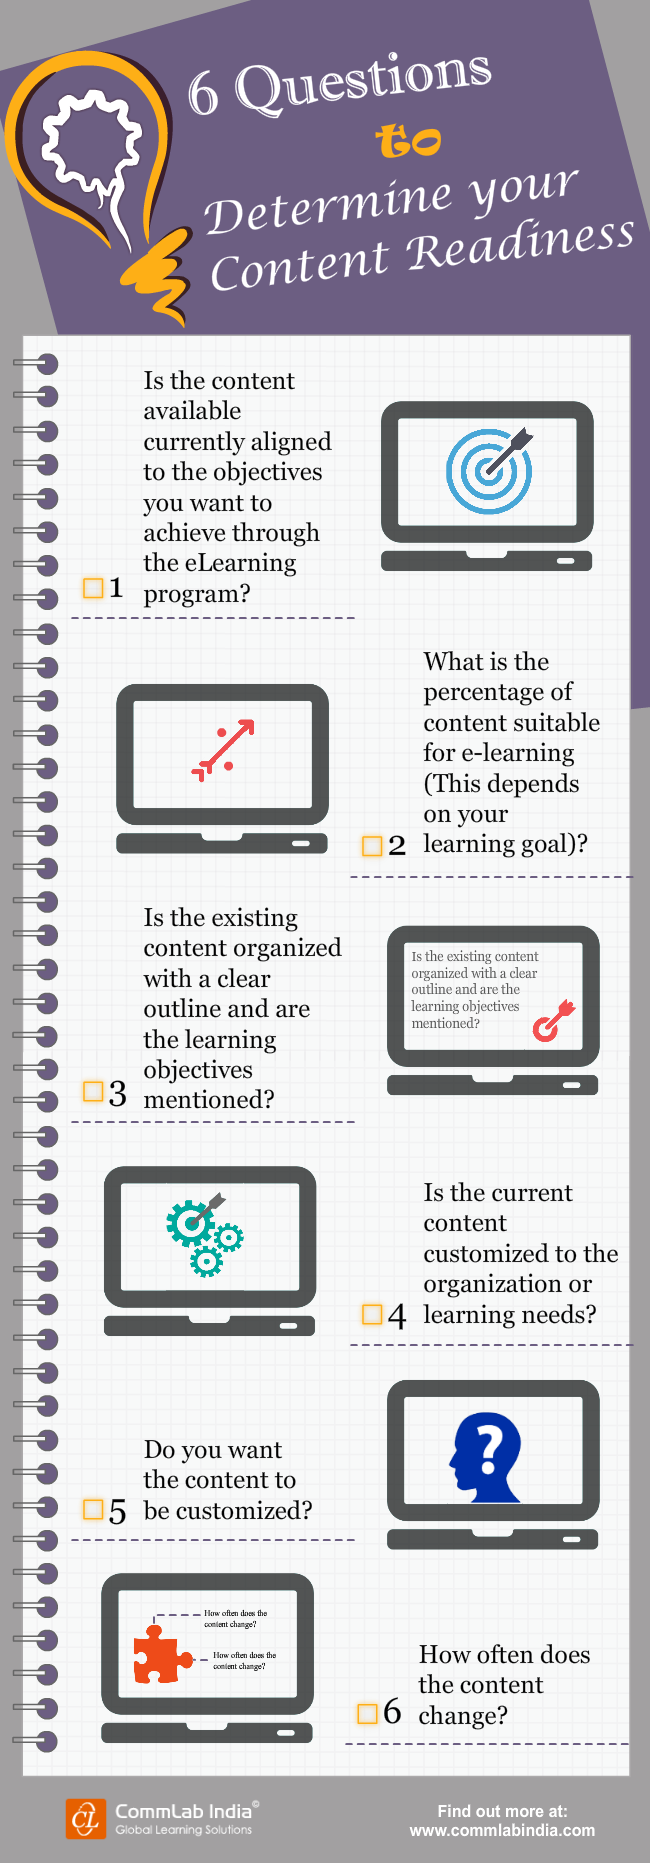 6 Questions to Determine your Content Readiness for E-learning [Infographic]